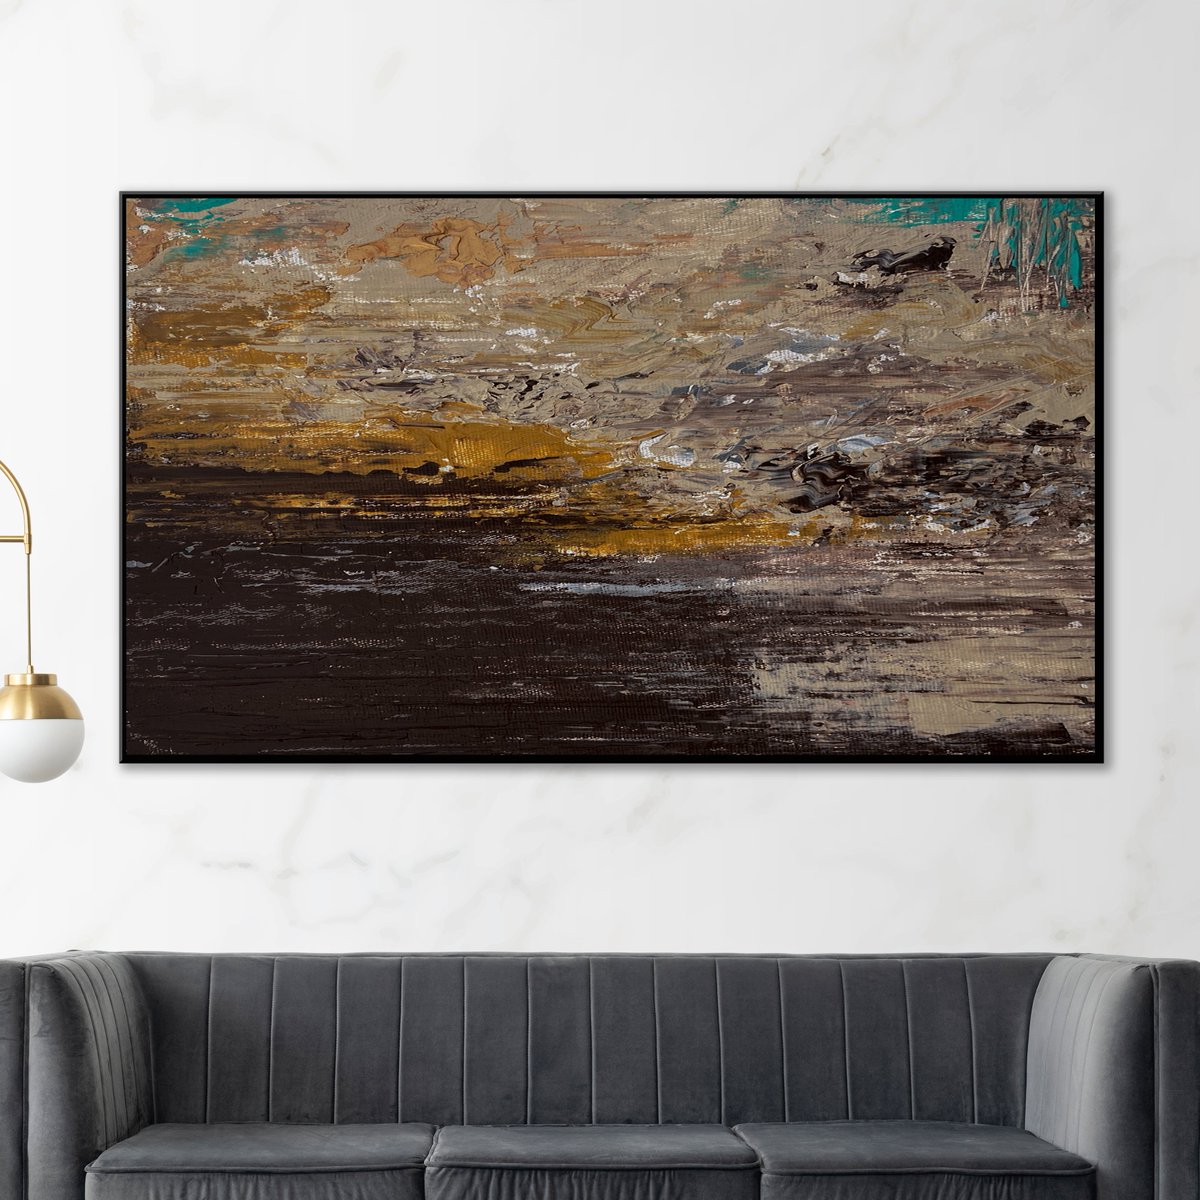 Best Personalized Gift: Black and Brown Acrylic Pour Painting on a Gold Frame Stretched Canvas
FREE Global Shipping Available, Purchase Here
etsy.com/uk/listing/147…

#brownpainting #PaintingGift #handmadepainting #textureart #UniqueArtPiece #ArtistOnTwitter #ArtistOnX